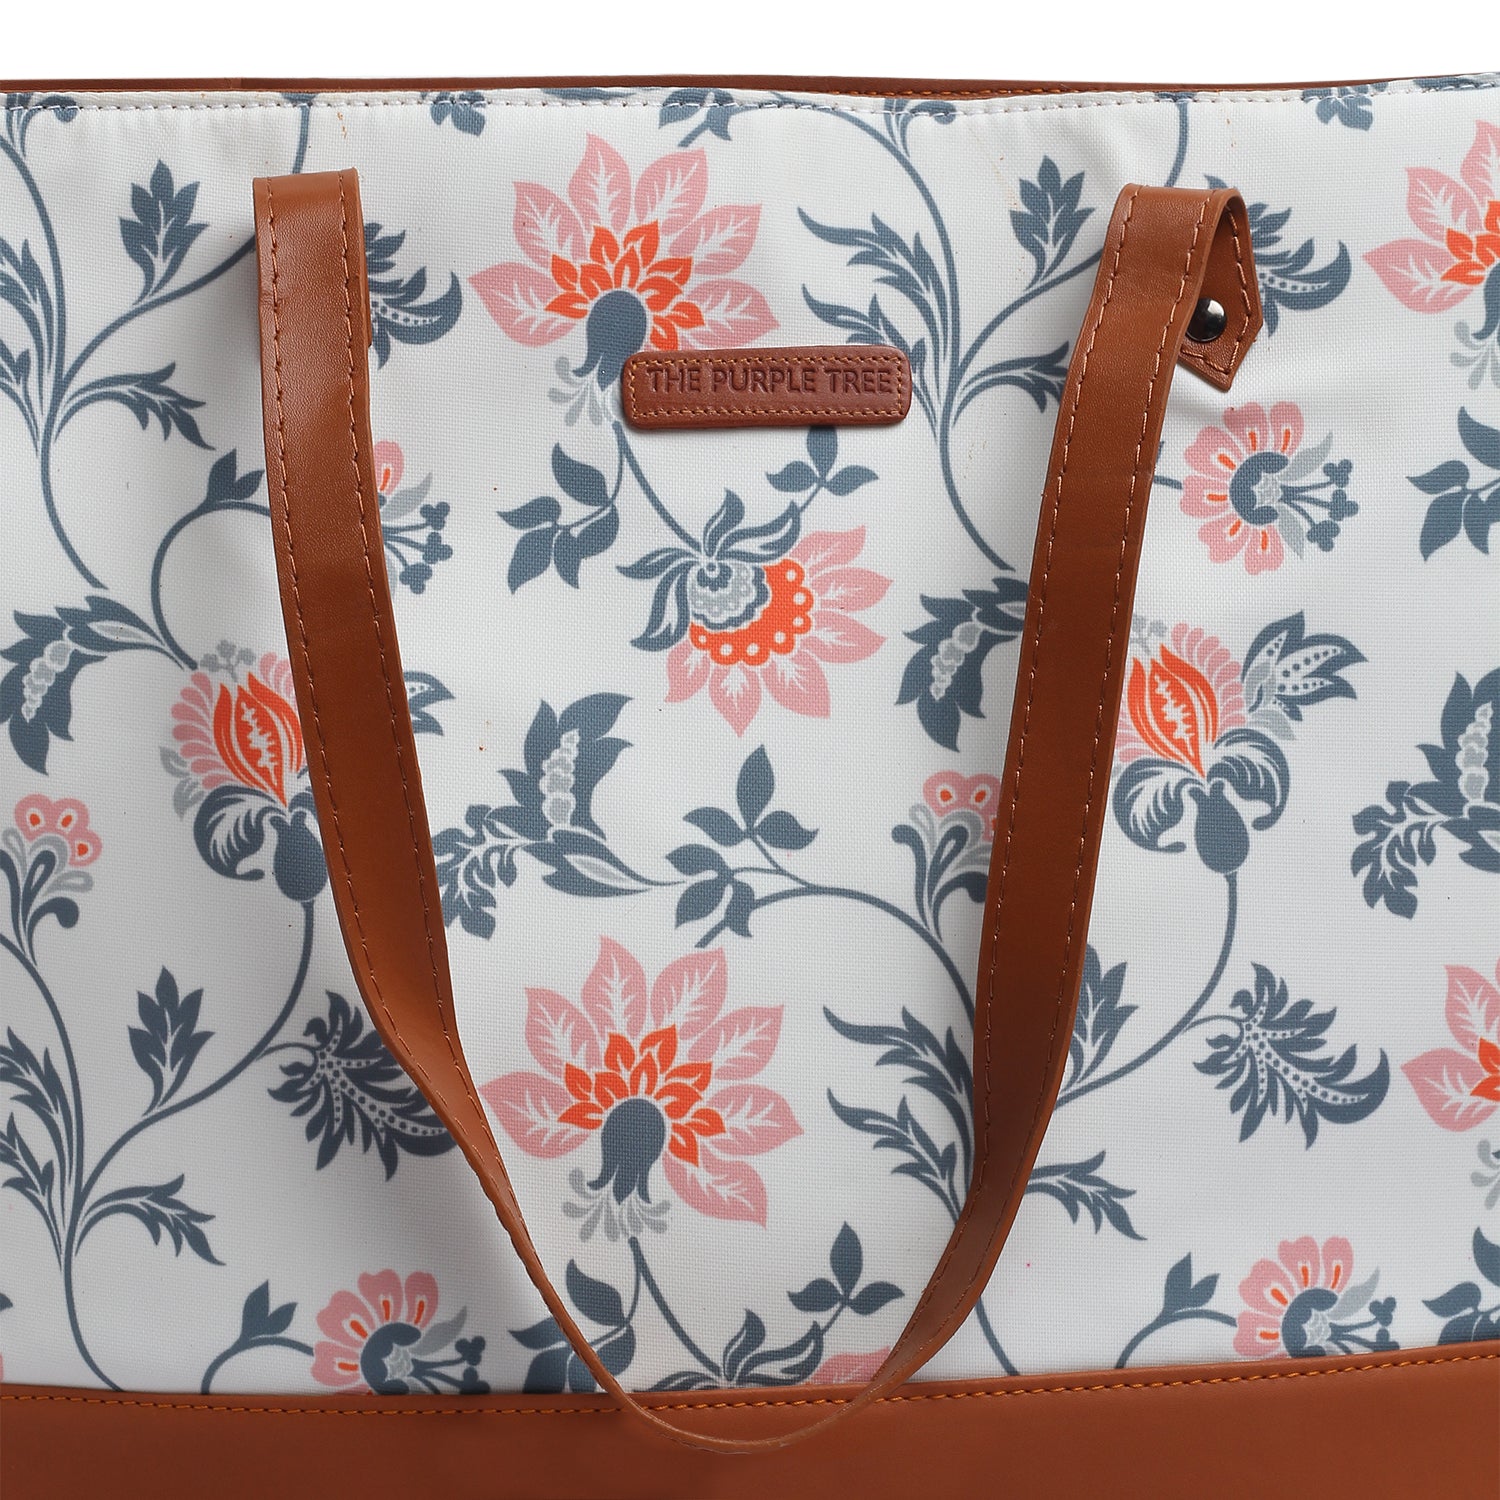 4. Lovely floral tote bag sitting on a chair.